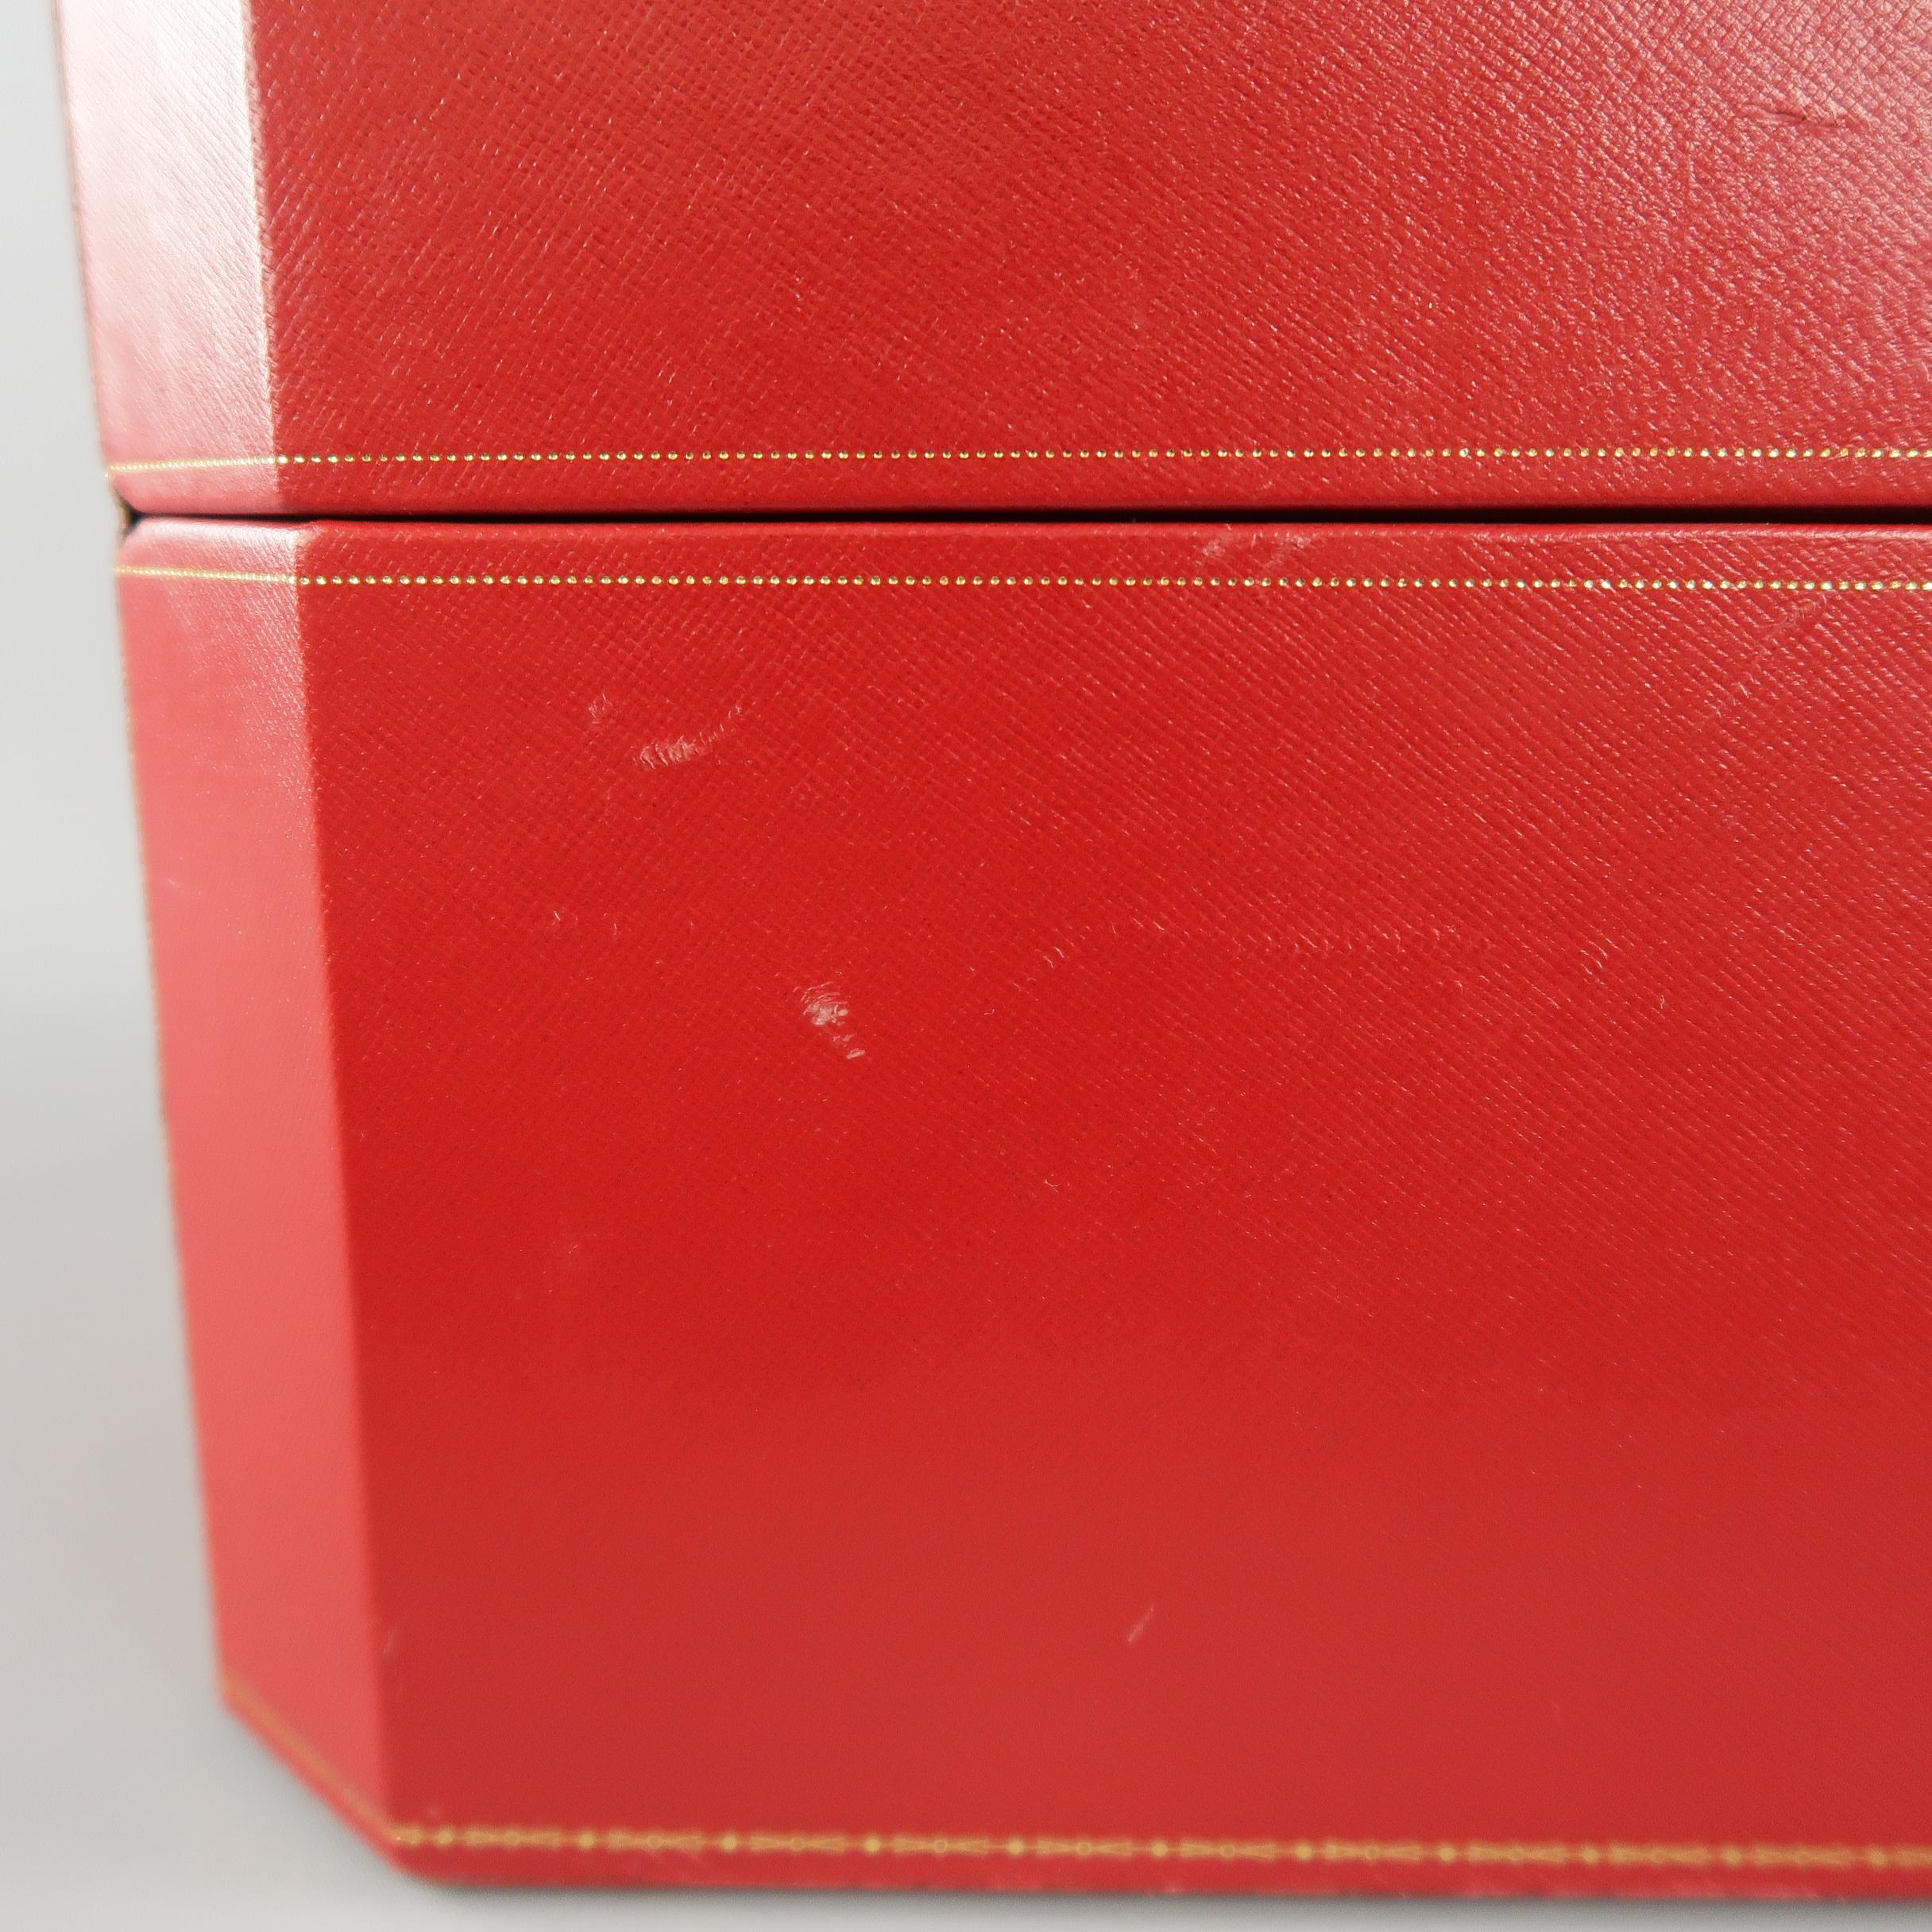 Vintage CARTIER Red Watch & Jewelry Storage Box with Drawer Compartments 5